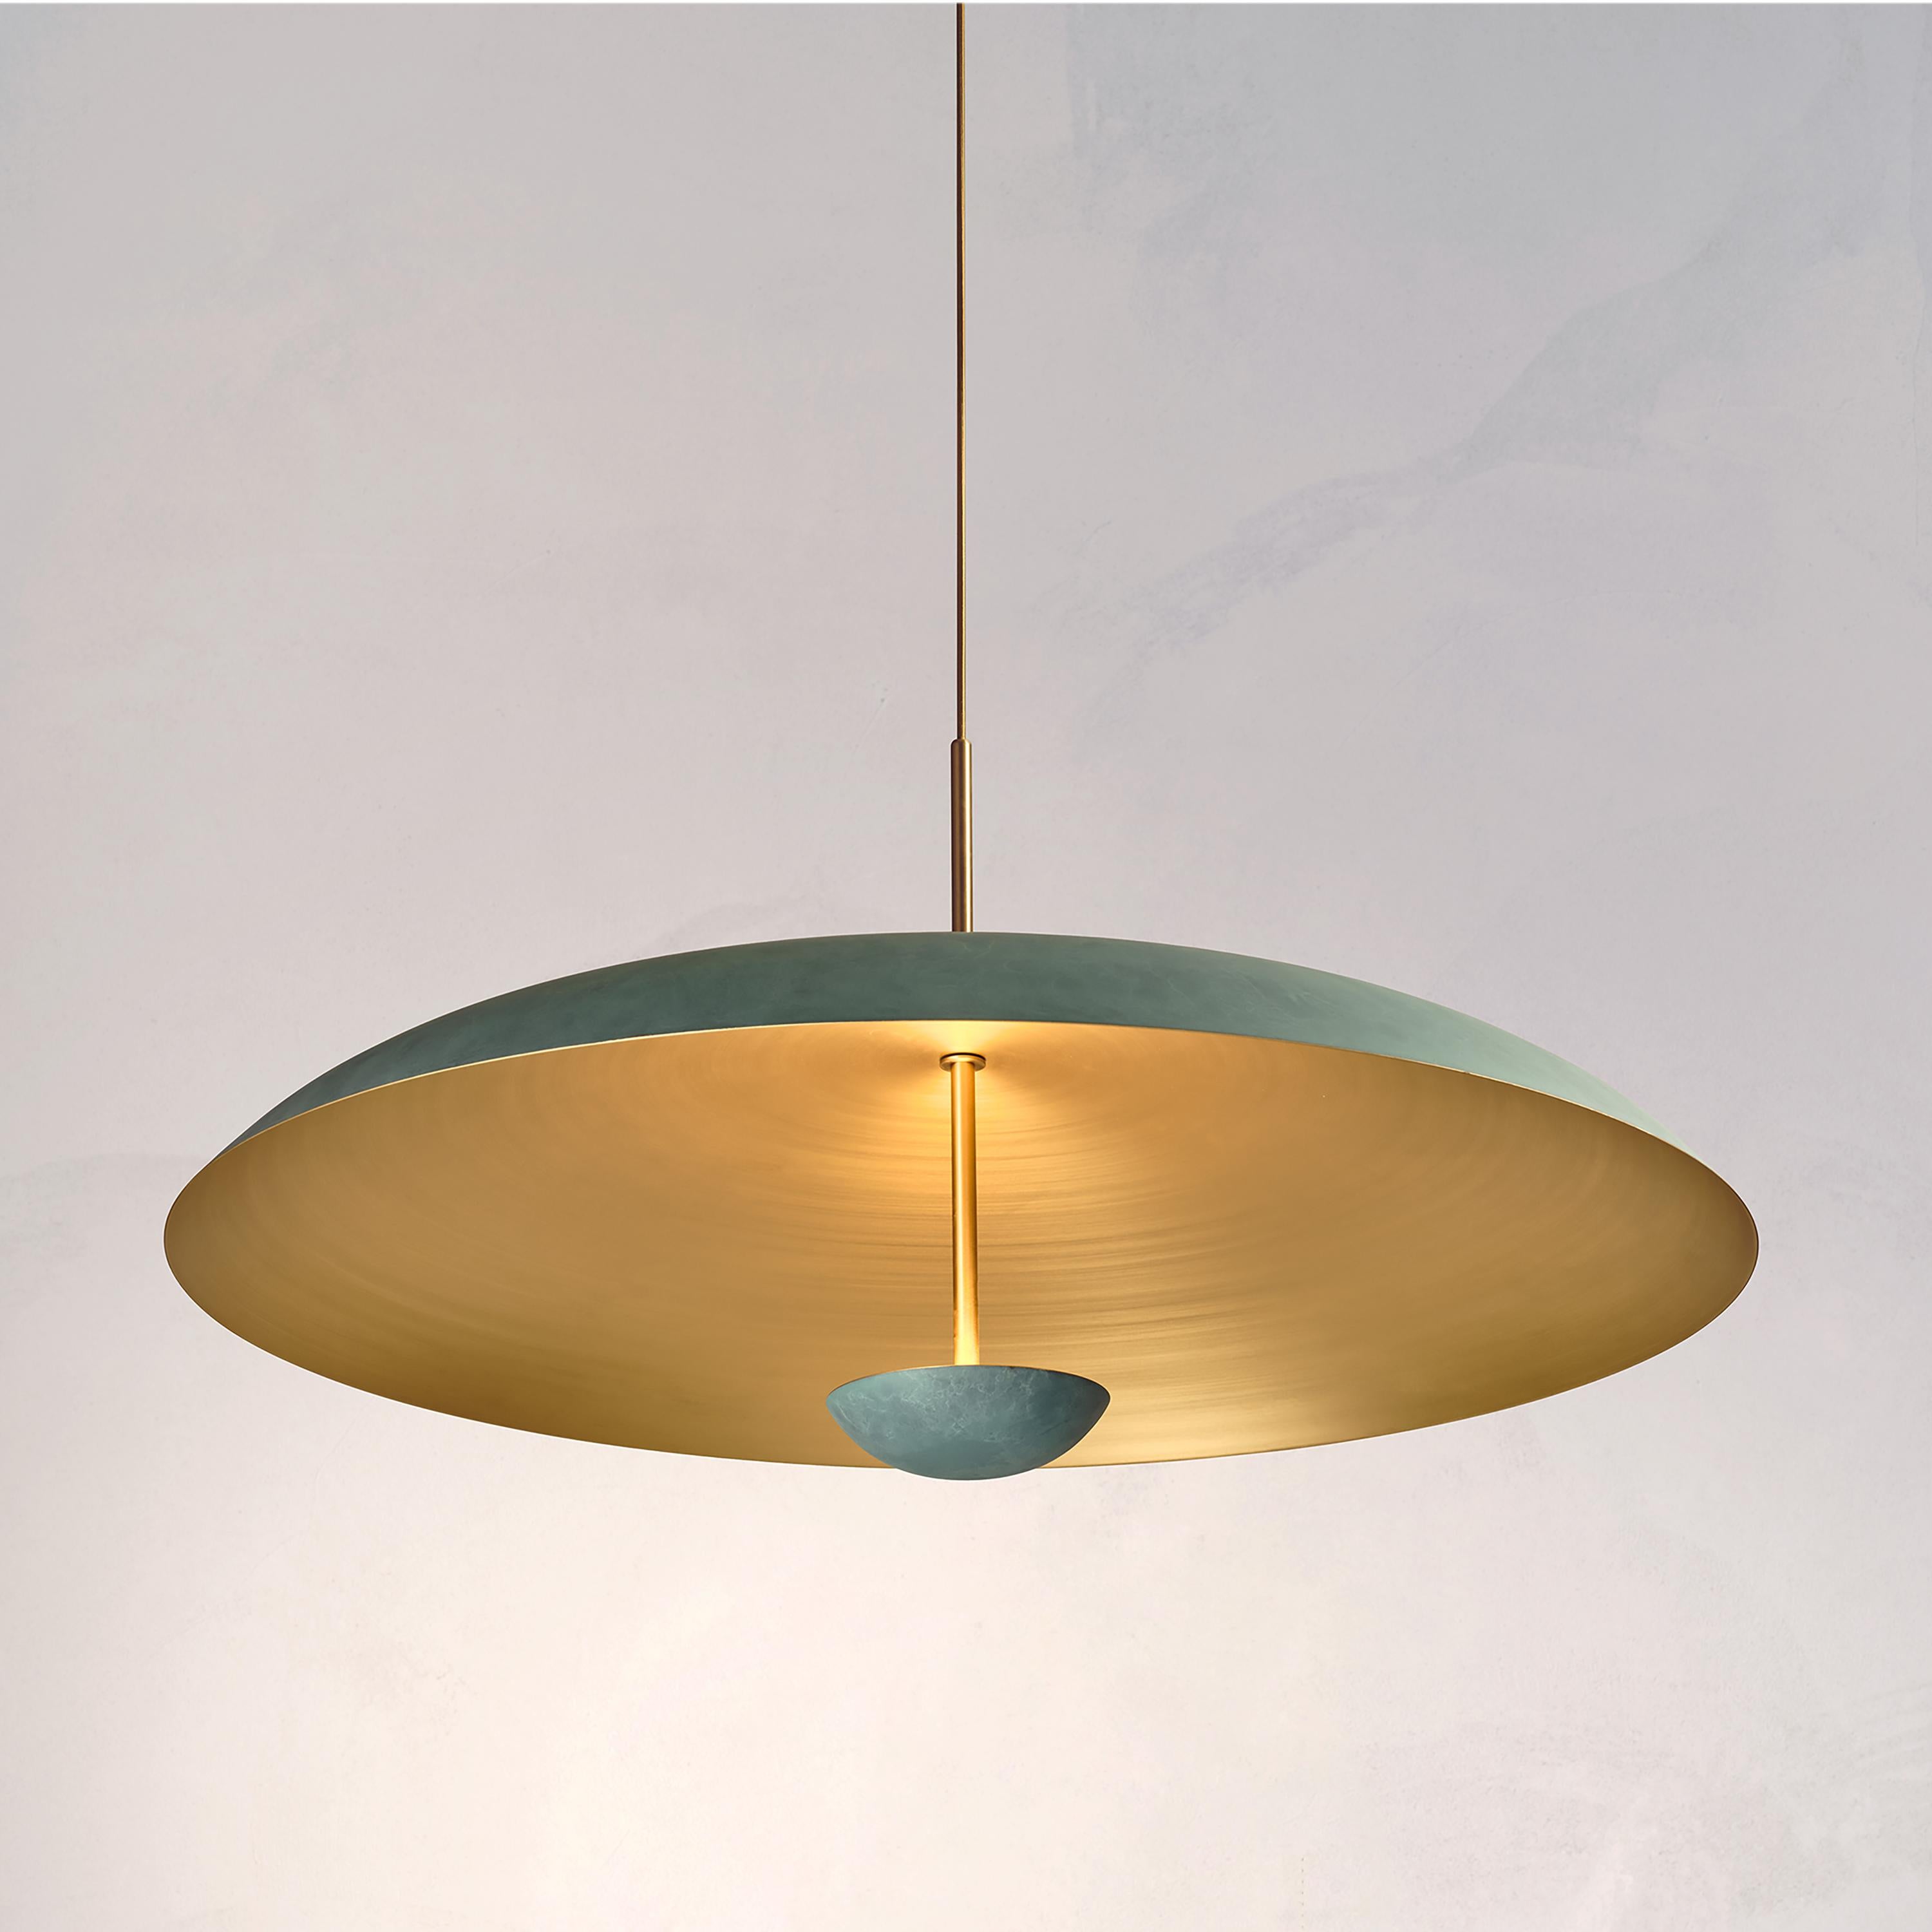 Two finely hand-spun brass plates make up this pendant light, finished in a mixed verdigris patina to create this unique appearance. The light is projected into the shade and reflects out, illuminating without creating a glare.
 
This light fixture